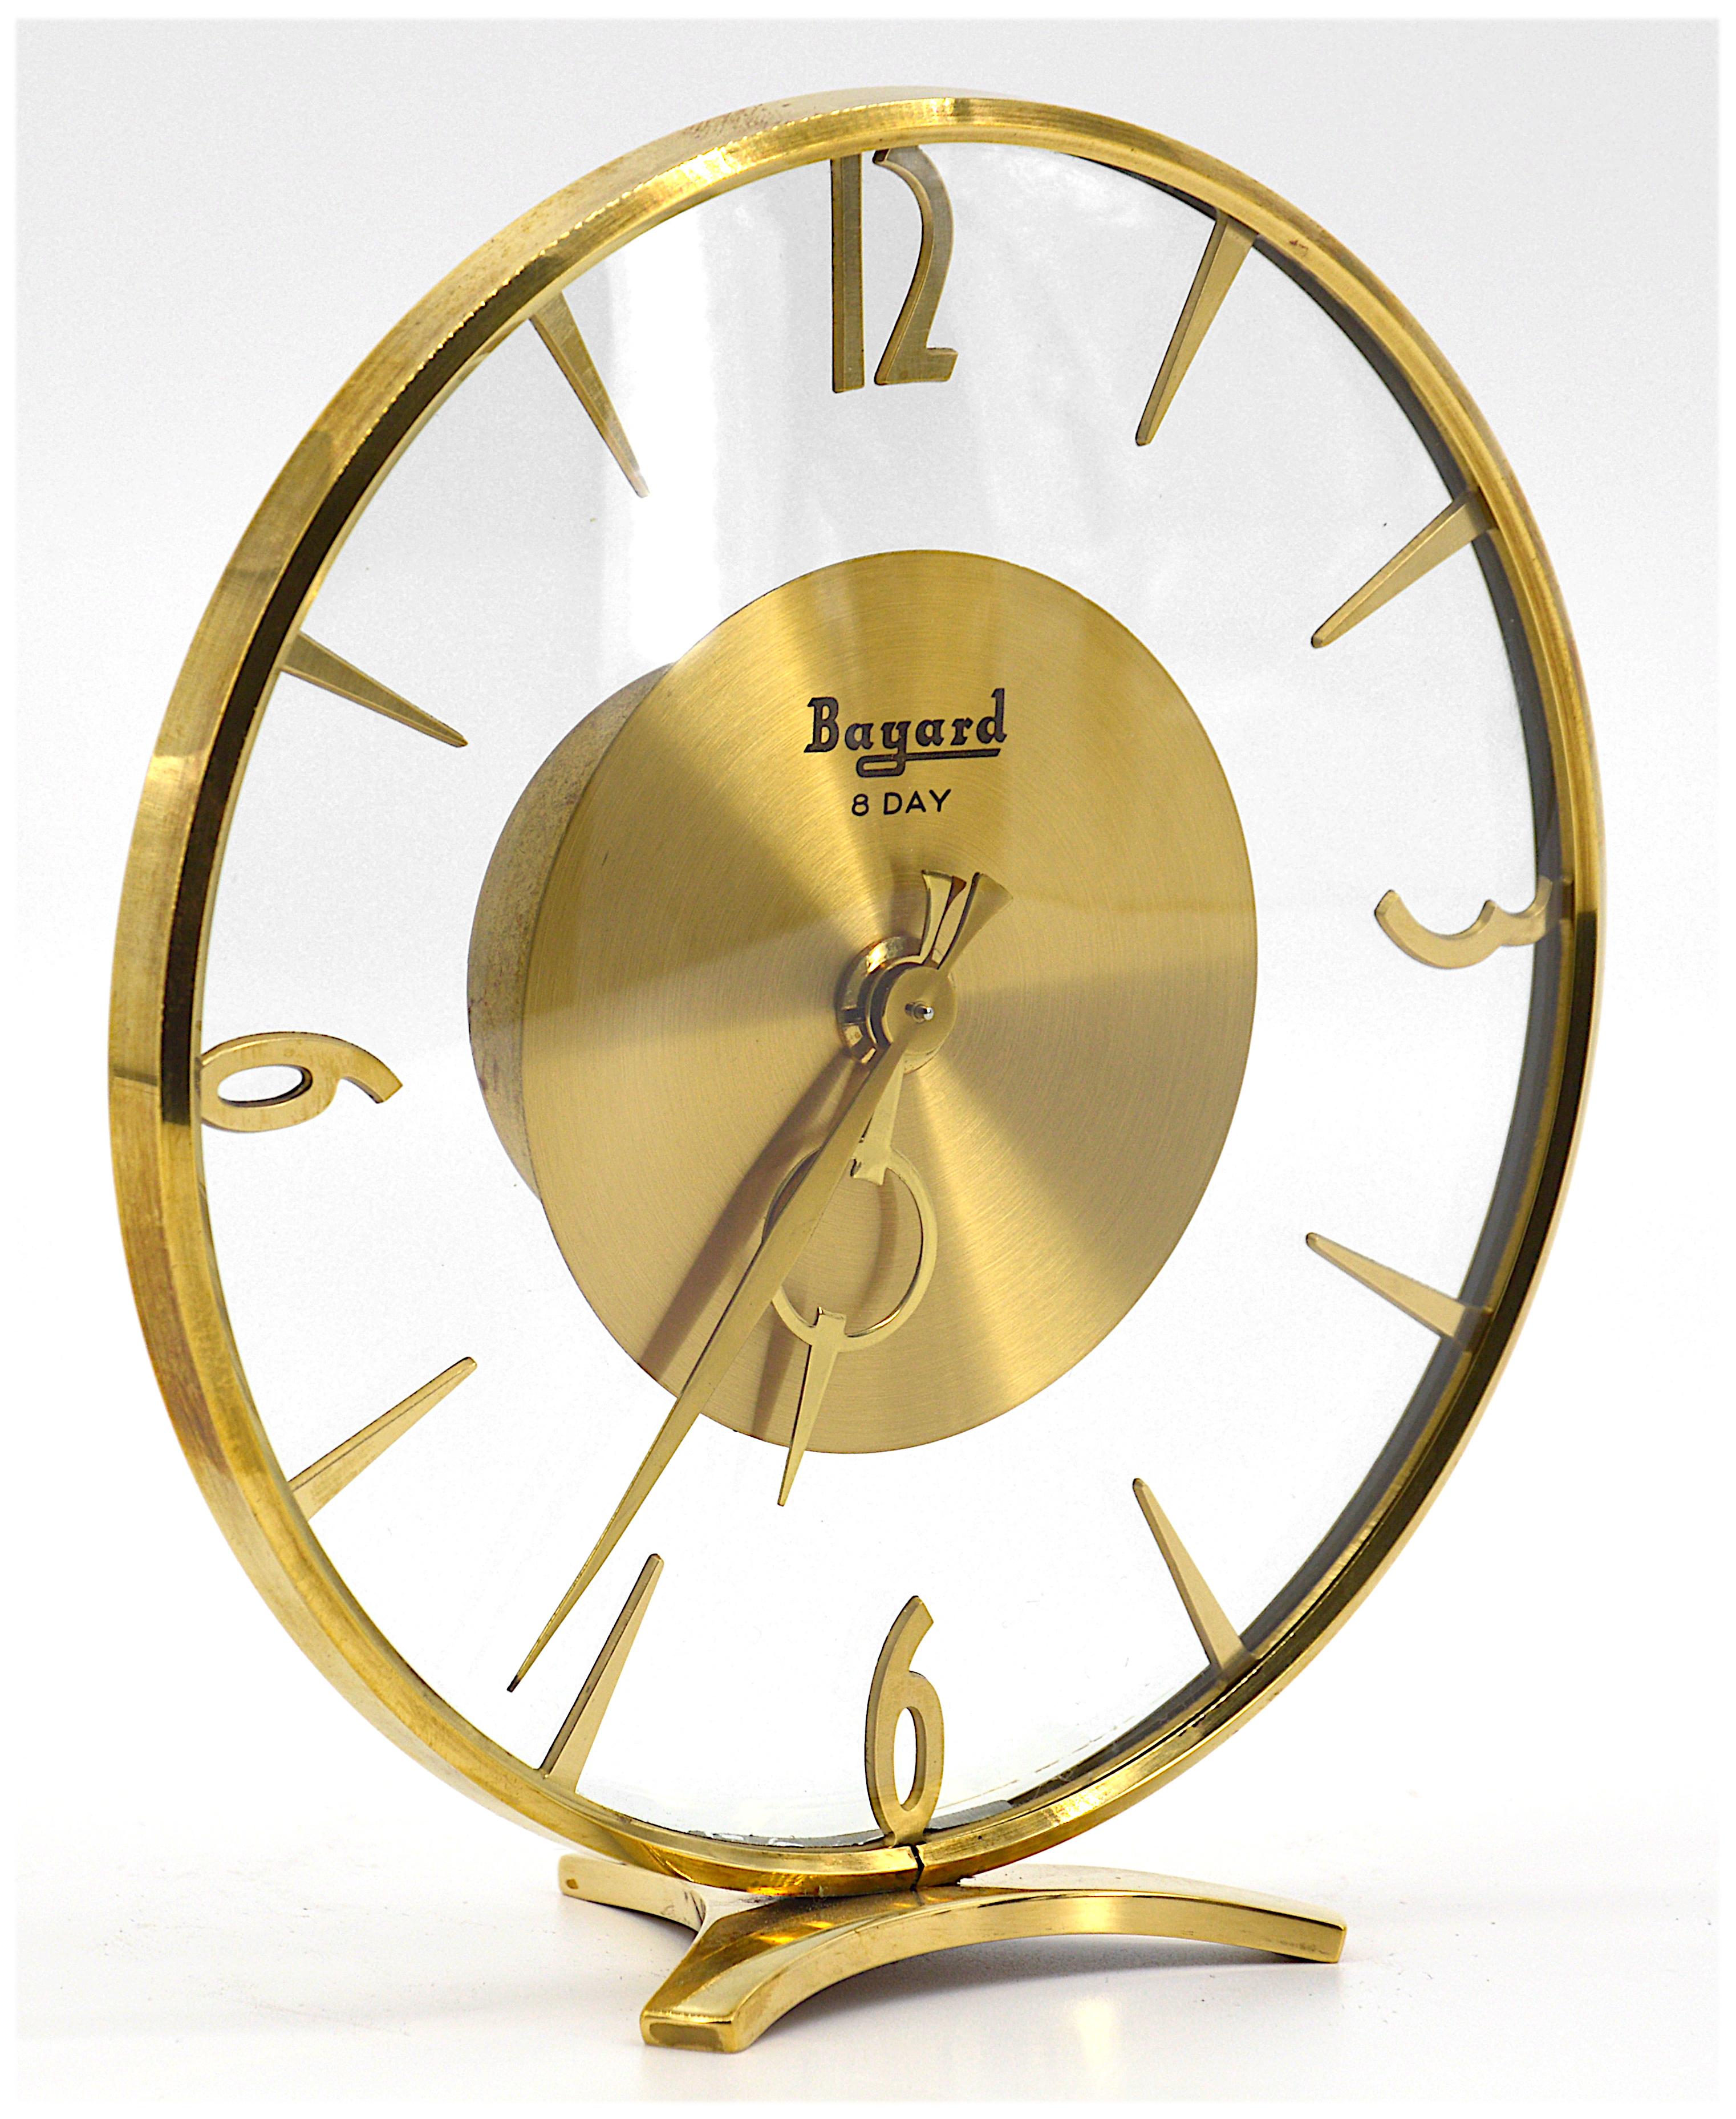 Art Deco table clock by Bayard, France, 1930s. Brass and glass. 8 days movement. Measures: Height 6.7